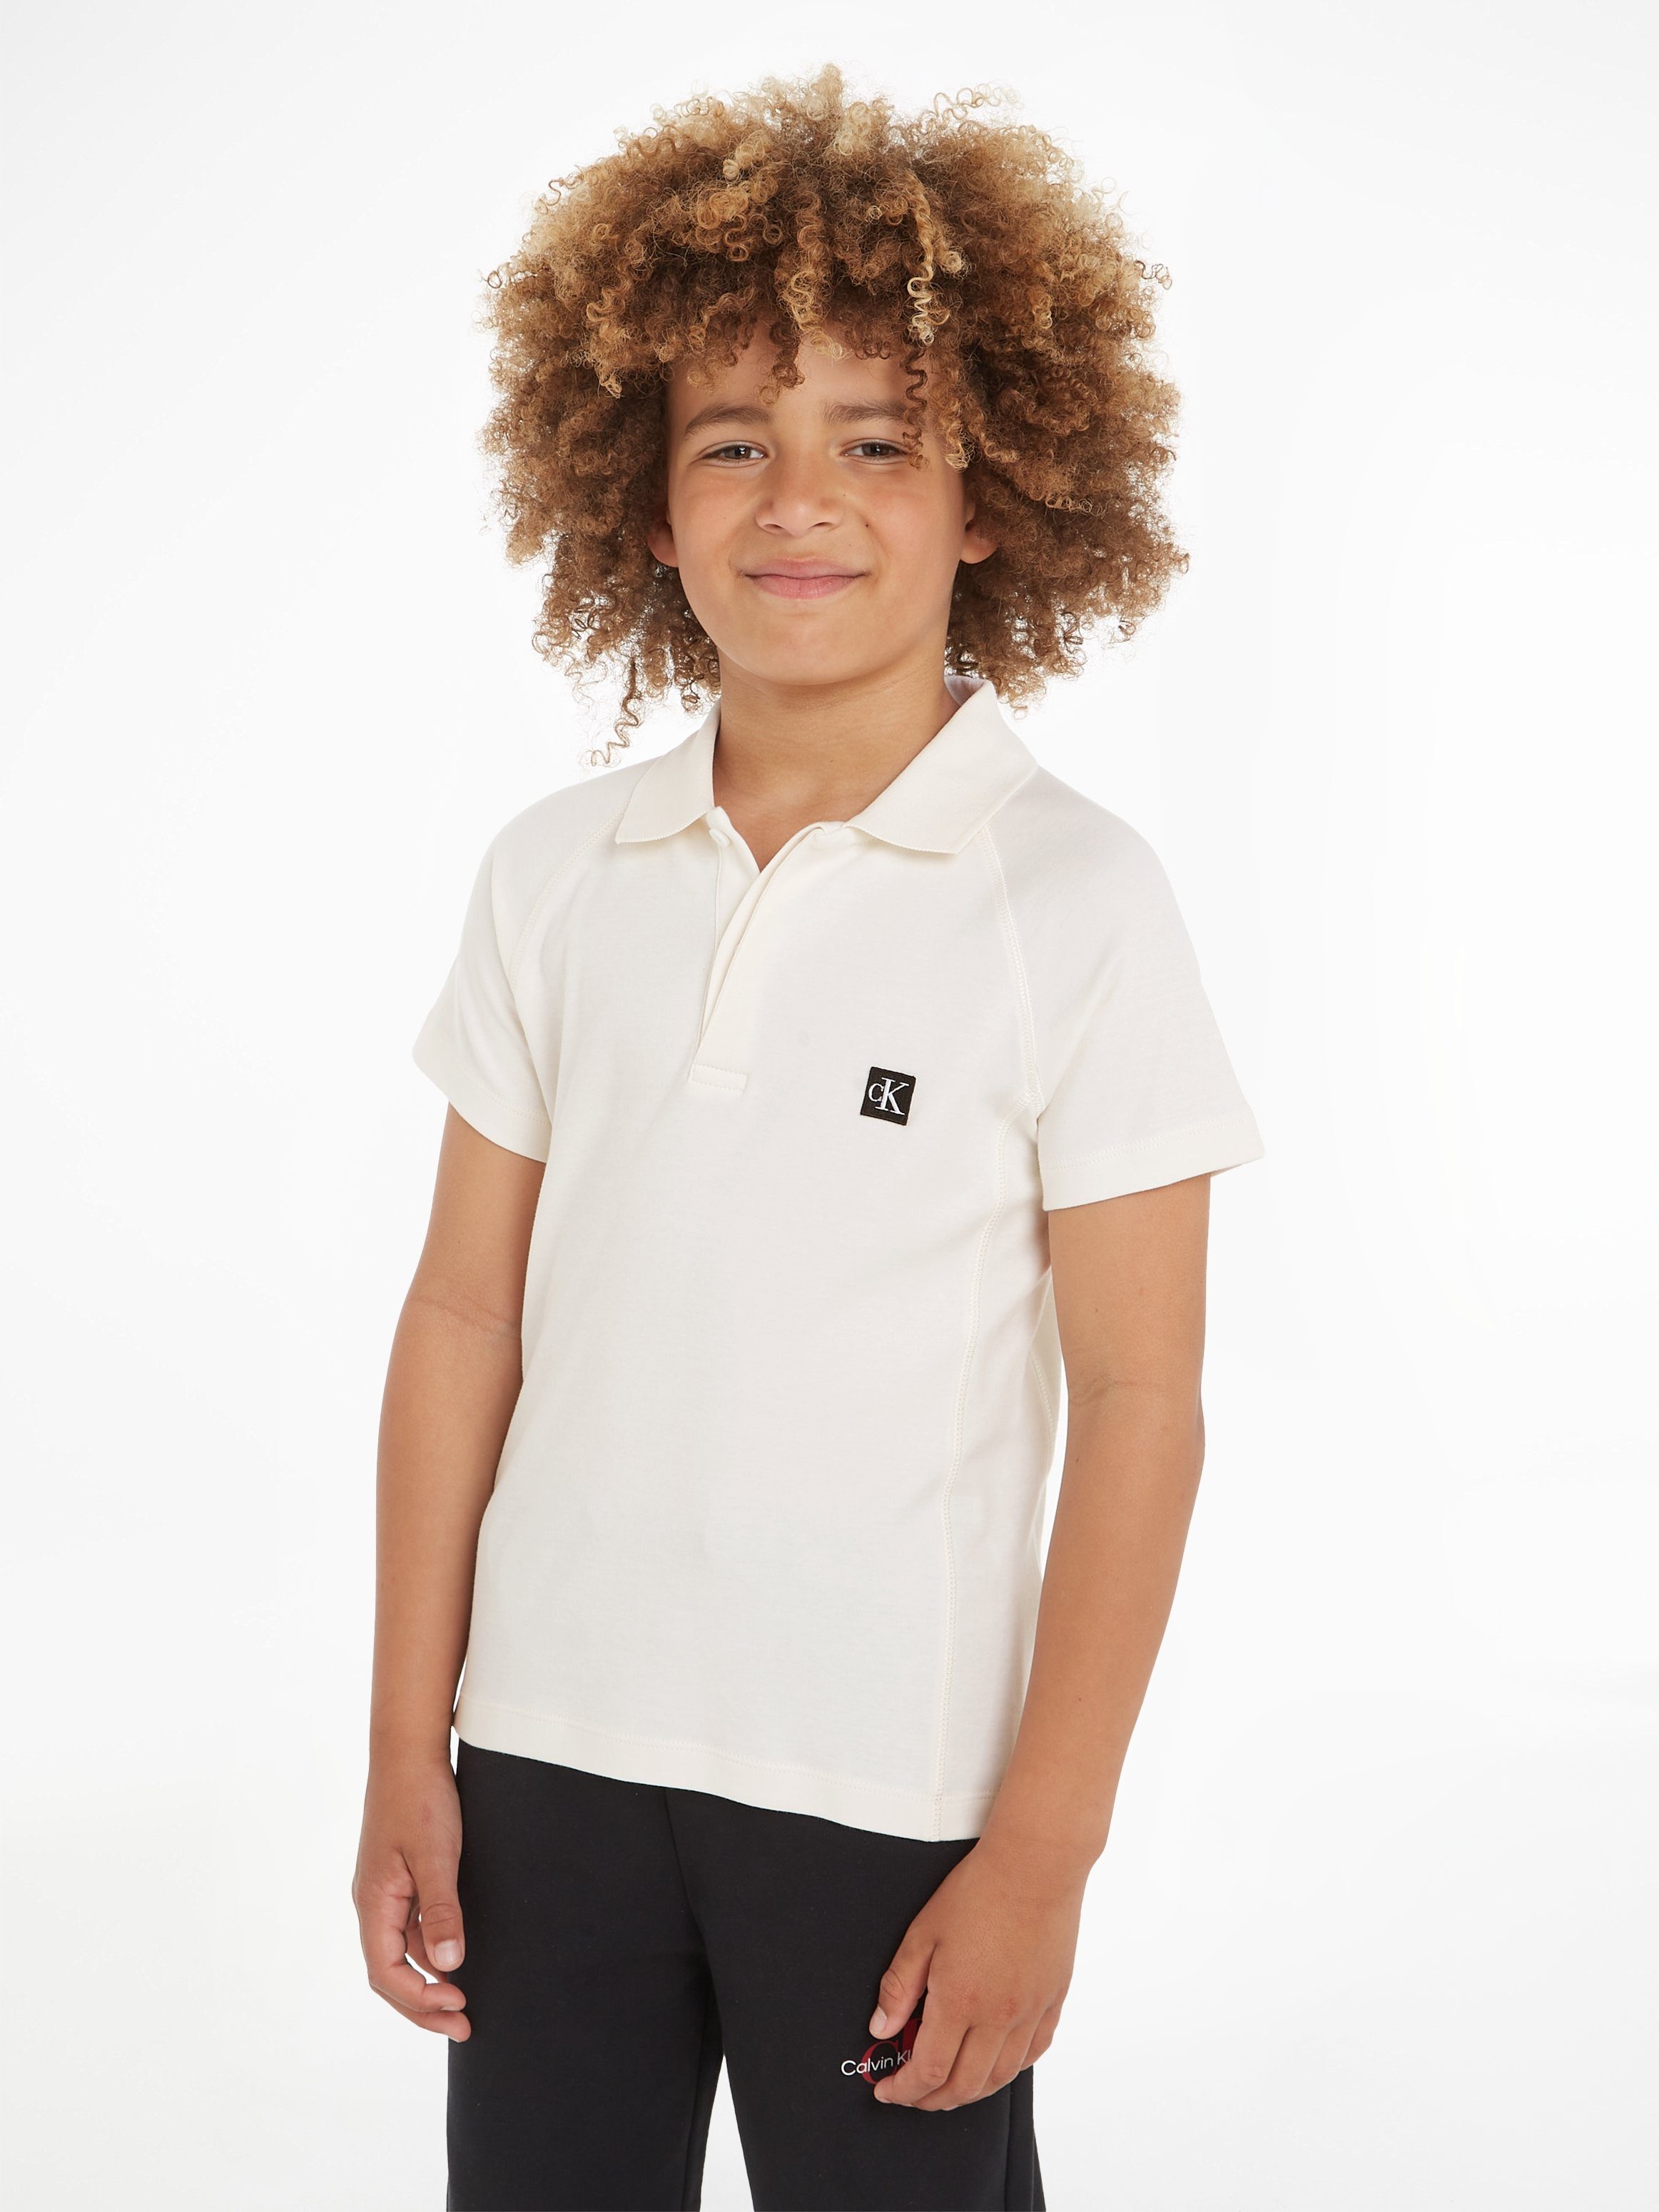 JERSEY Bright Calvin Poloshirt SOFT Klein White Jeans mit Logopatch CEREMONY POLO